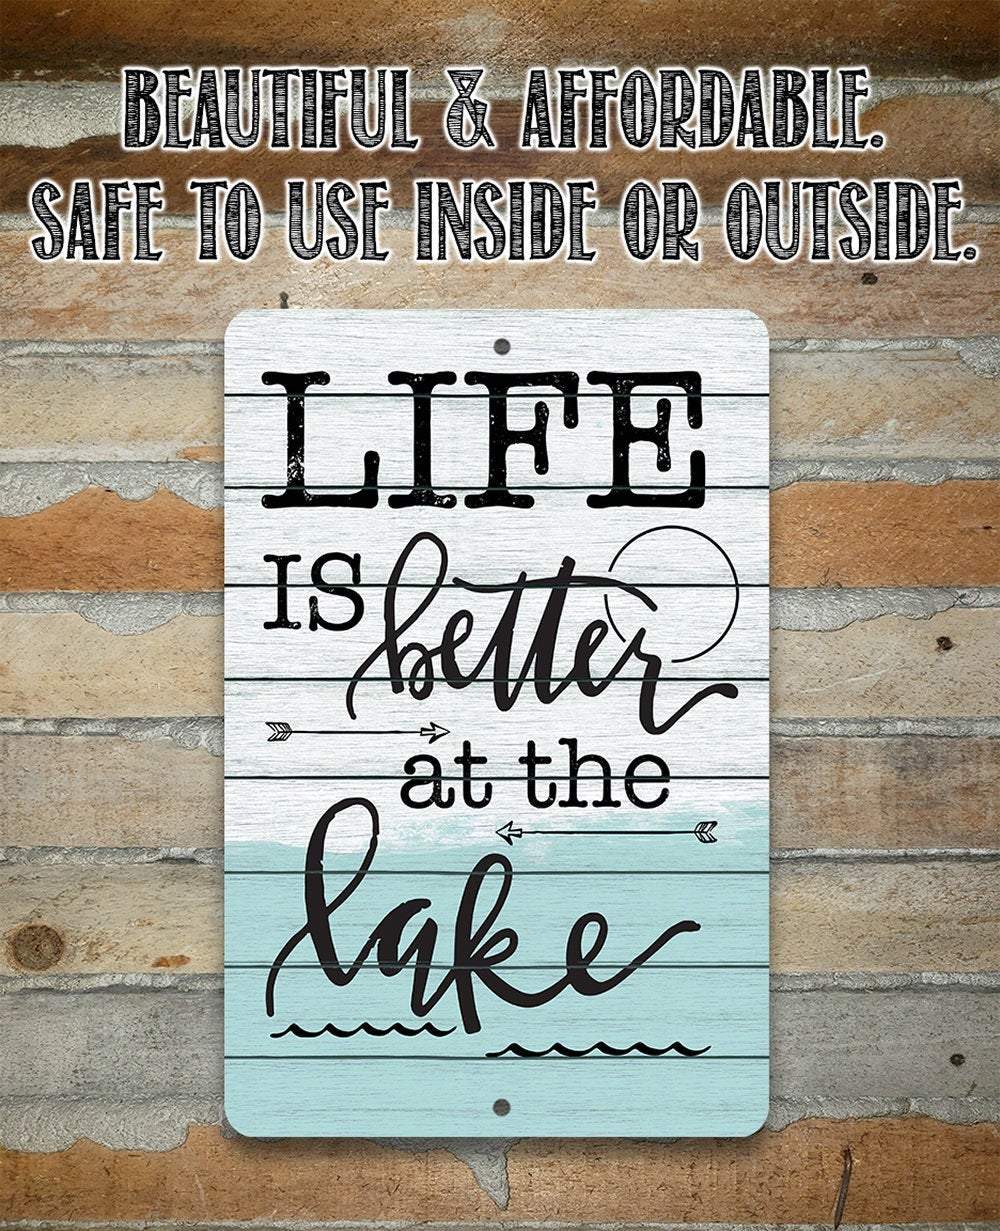 Life Is Better at The Lake 2 - Metal Sign | Lone Star Art.